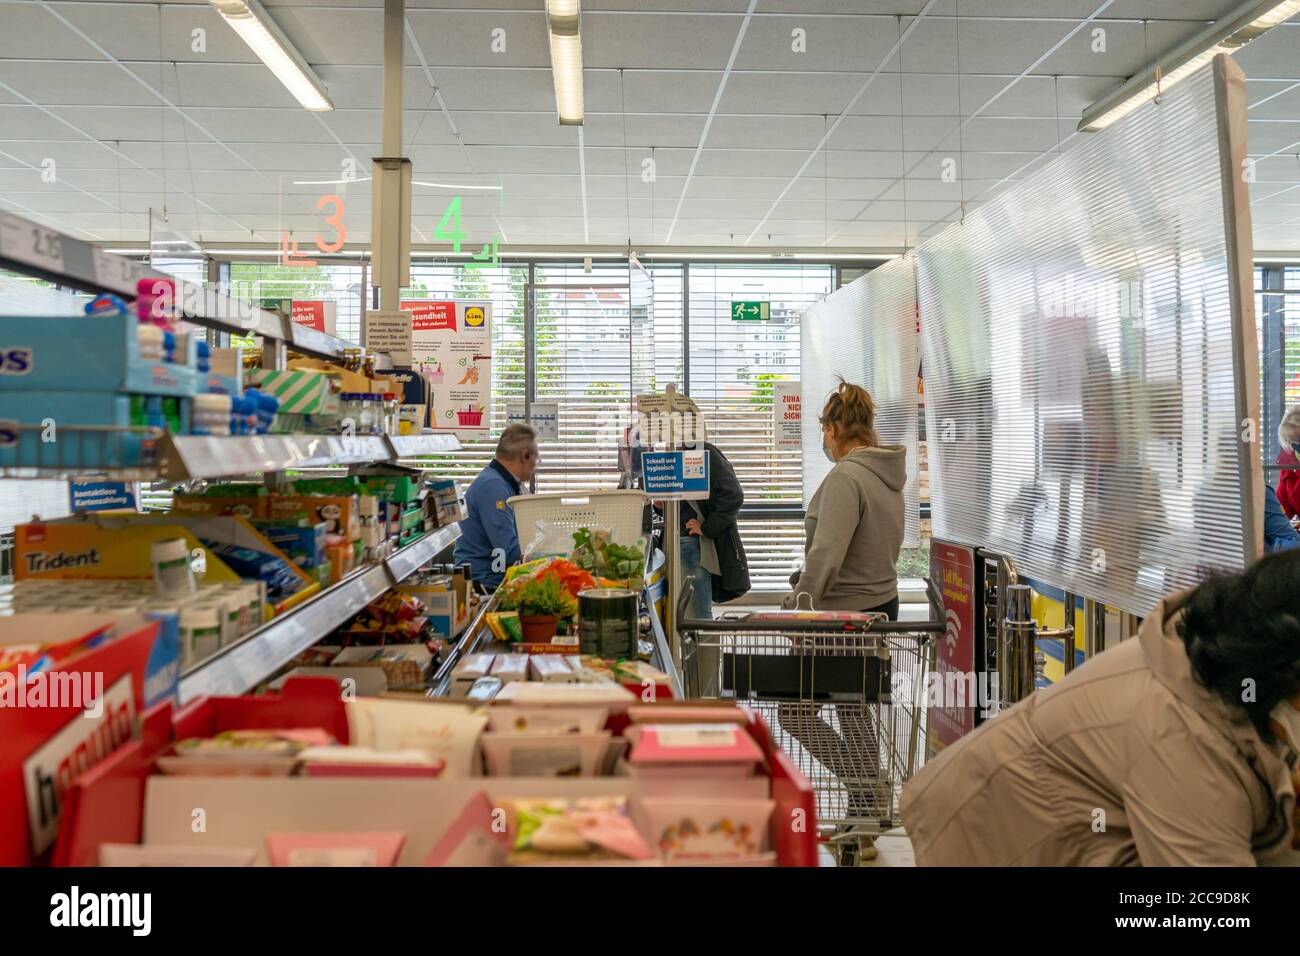 BERLIN, GERMANY - May 14, 2020: BERLIN, GERMANY May 14, 2020. Supermarket in Berlin under a protective screen because of Covid-19. Stock Photo